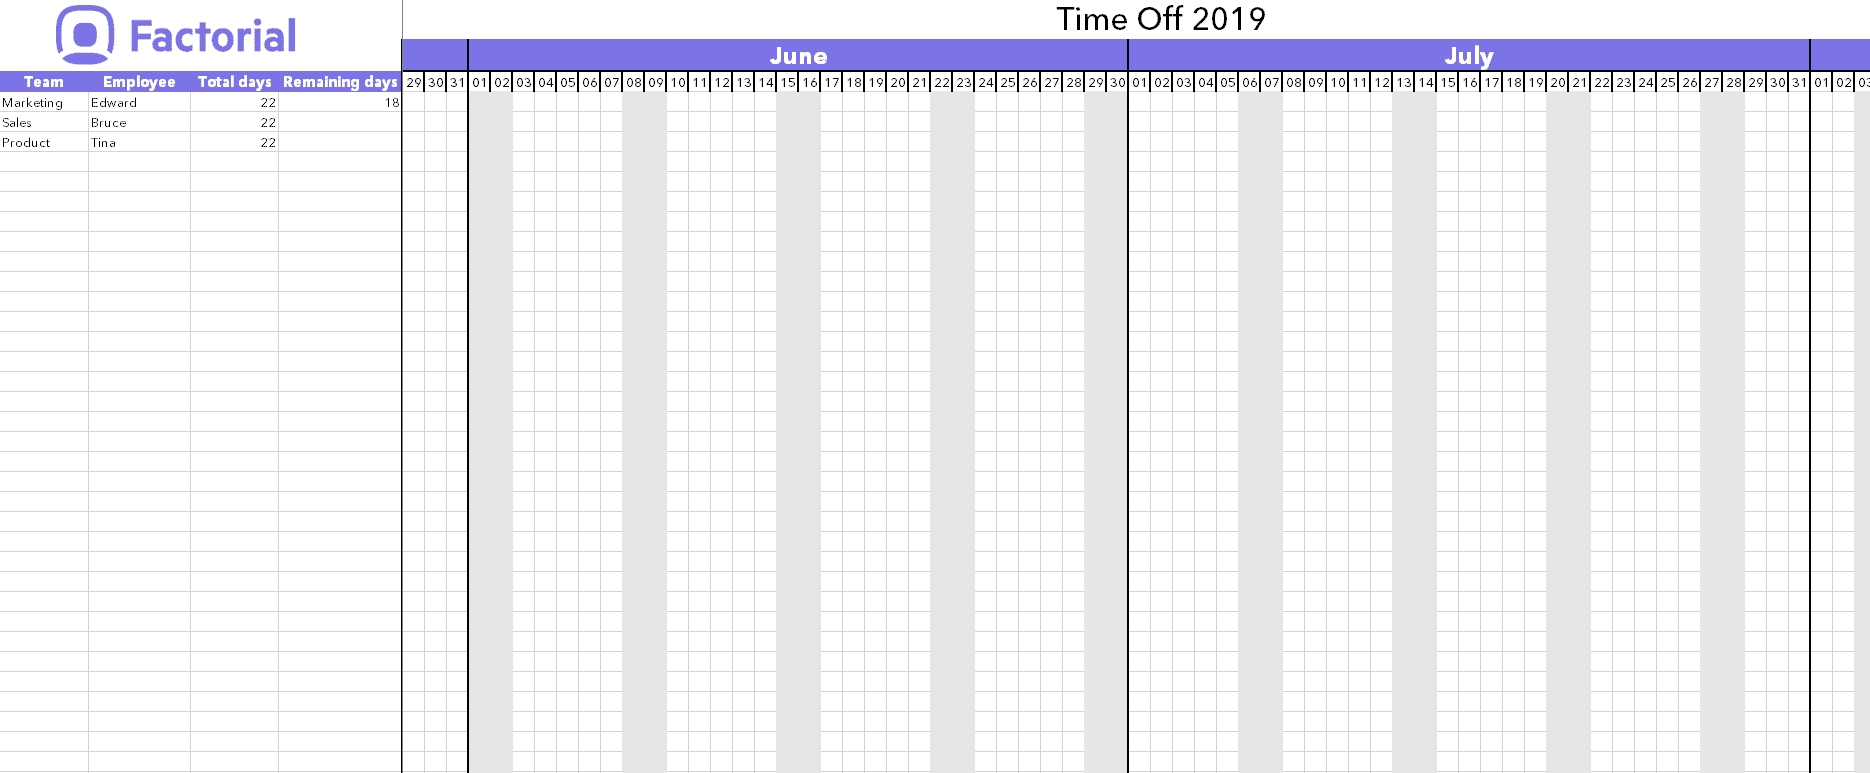 ? Manage Time Off Requests W/ Free Template | Factorial-Employees Vacation Planner 2021